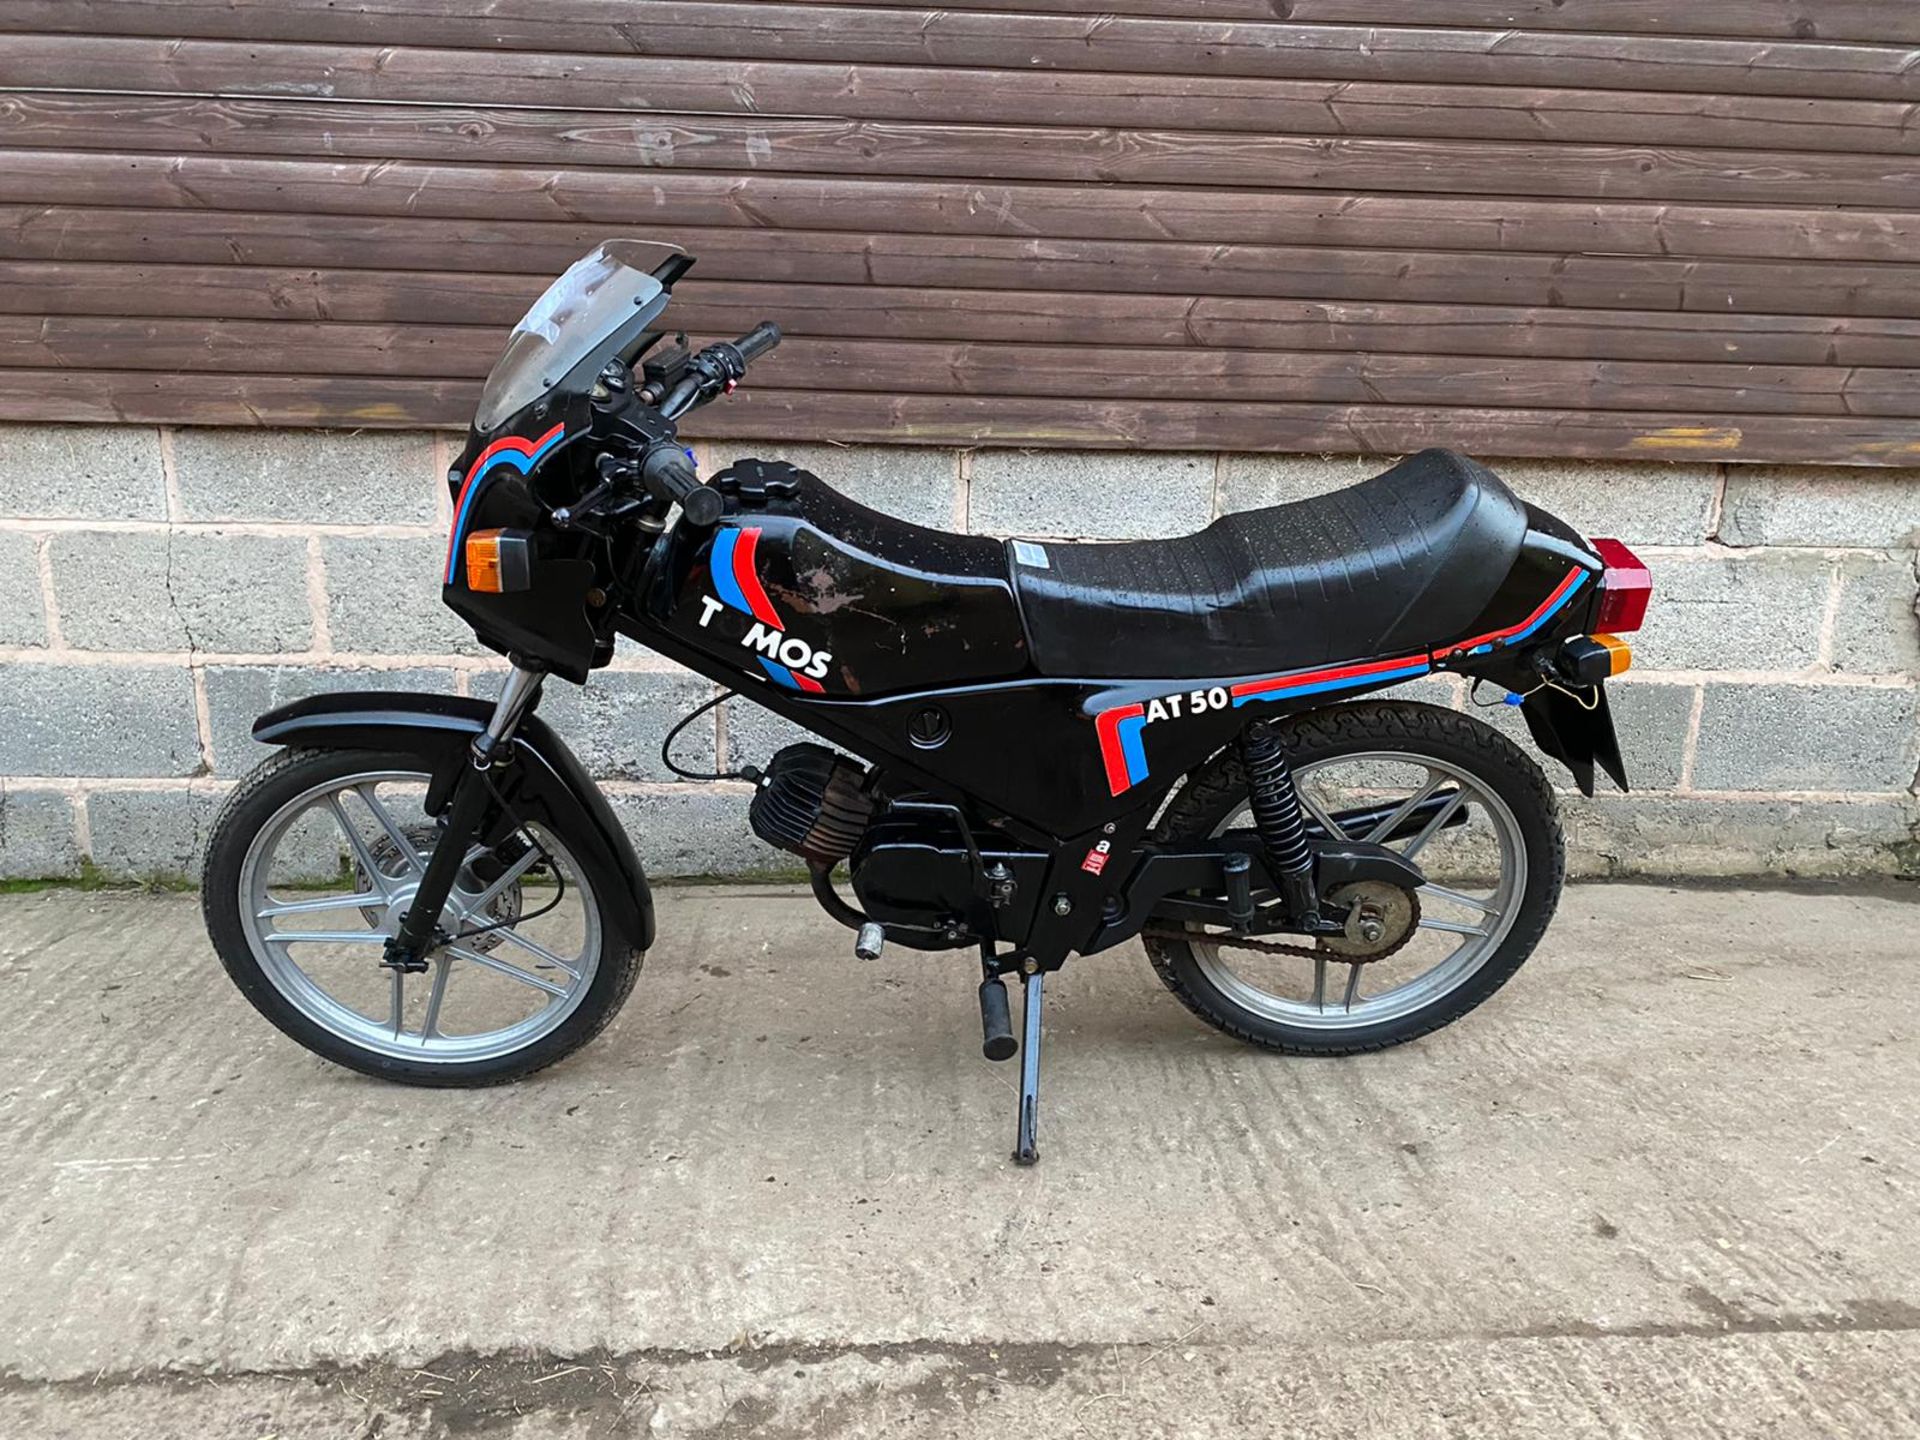 1989 TOMOS 50 CC CLASSIC MOPED LOCATION CO DURHAM - Image 3 of 3